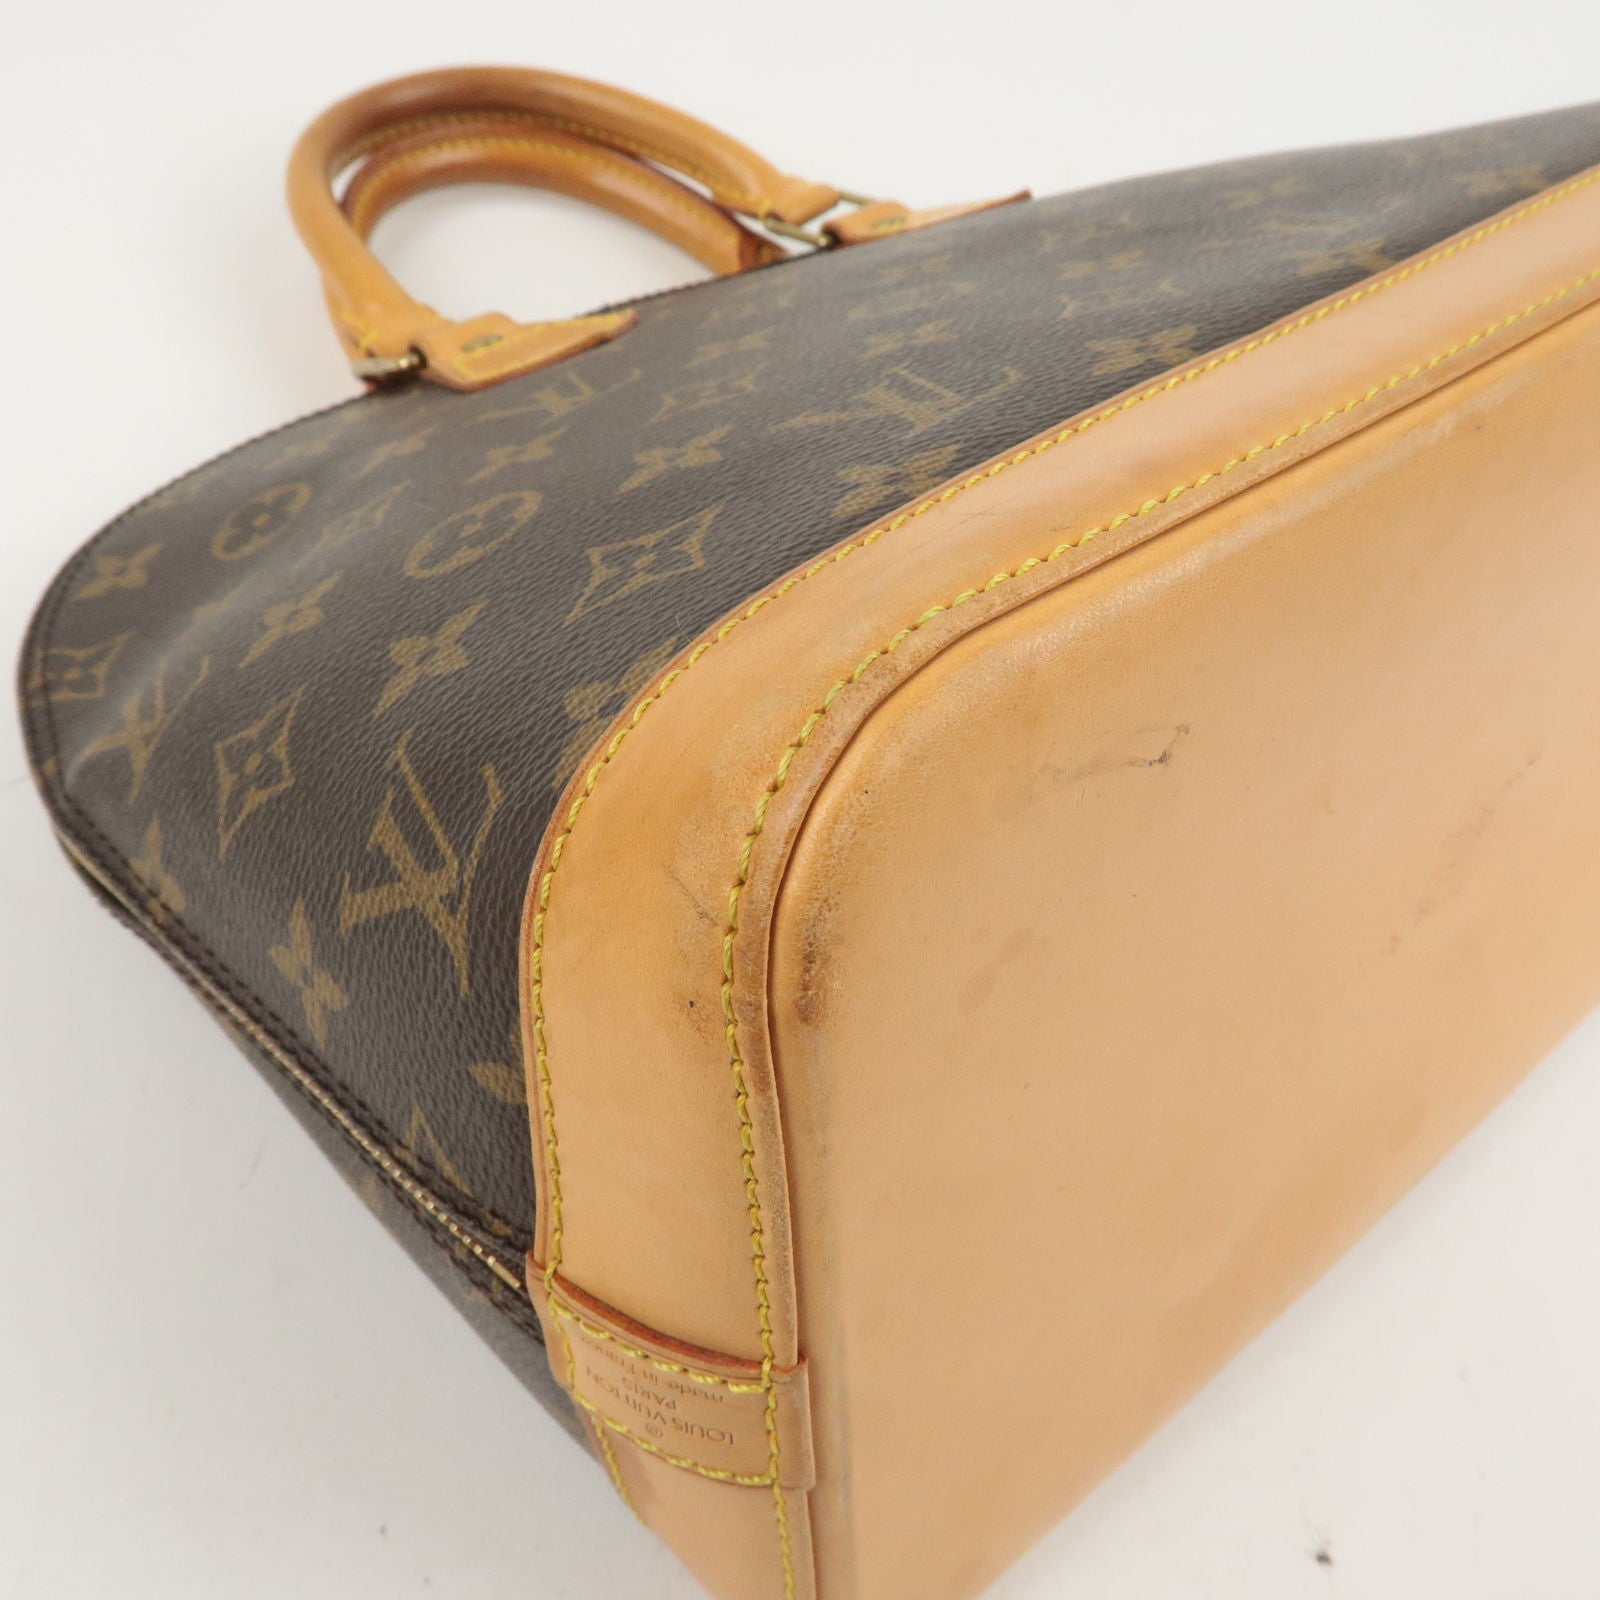 Barley used Louis V bag Alma BB,the paperwork and box in perfect condition